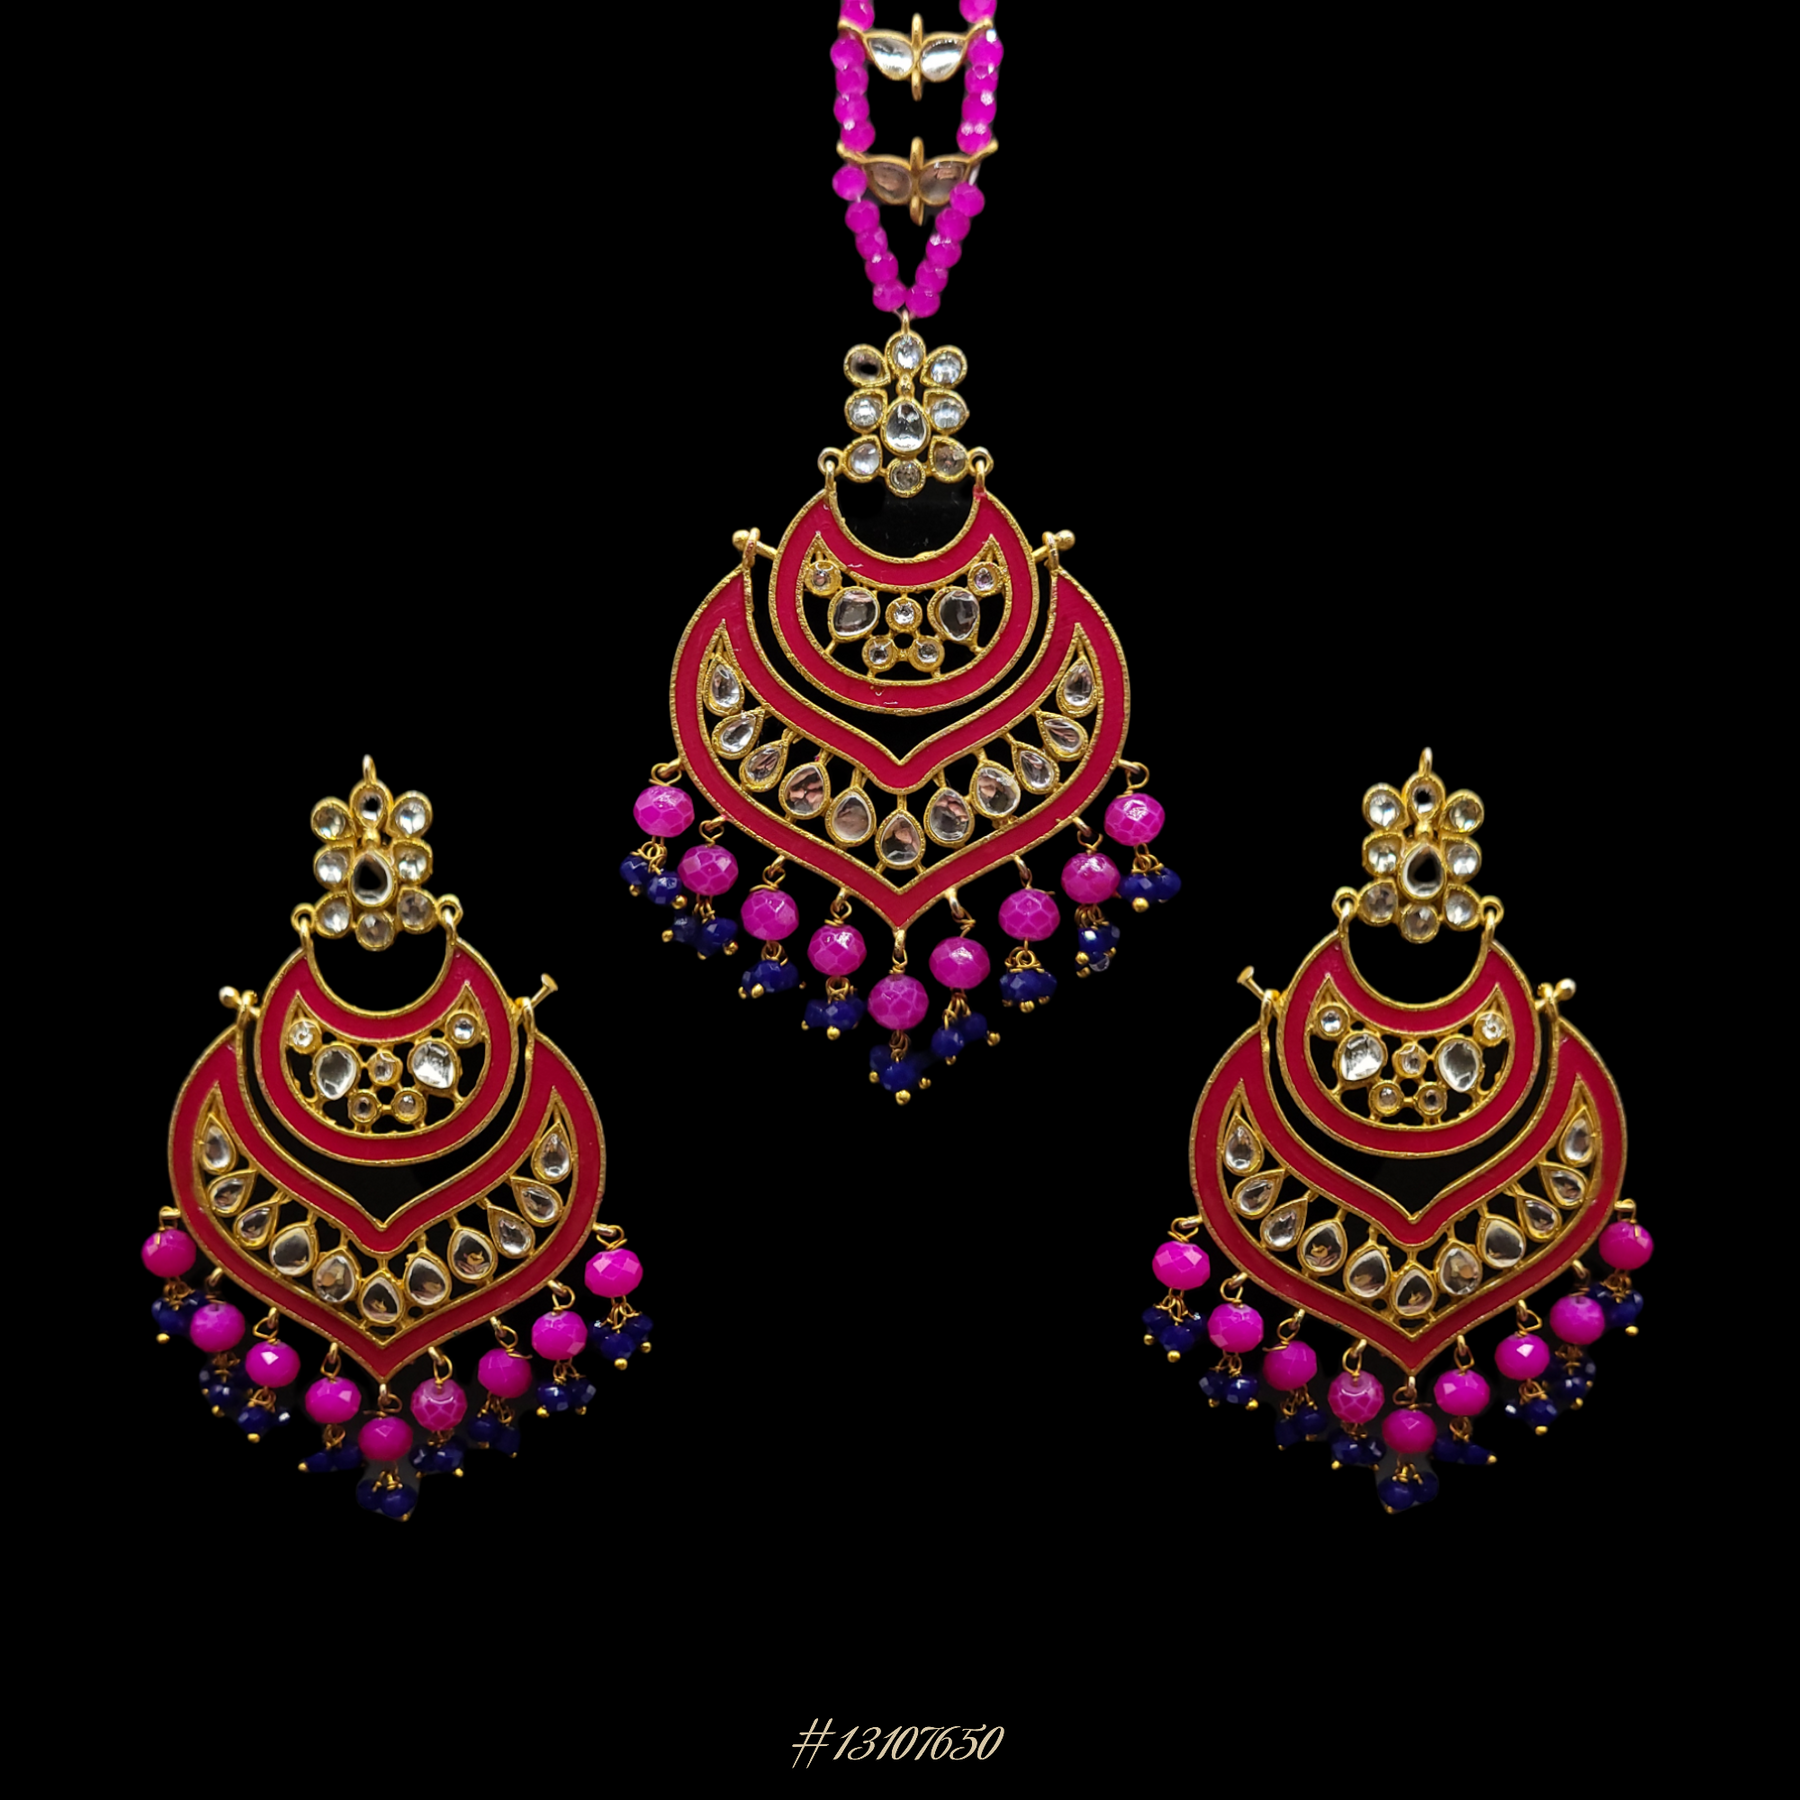 ELEGANT EARRINGS WITH MAANG TIKKA (HEAD PIECE) IN PINK, NAVY-BLUE, RED & GOLD COLOR